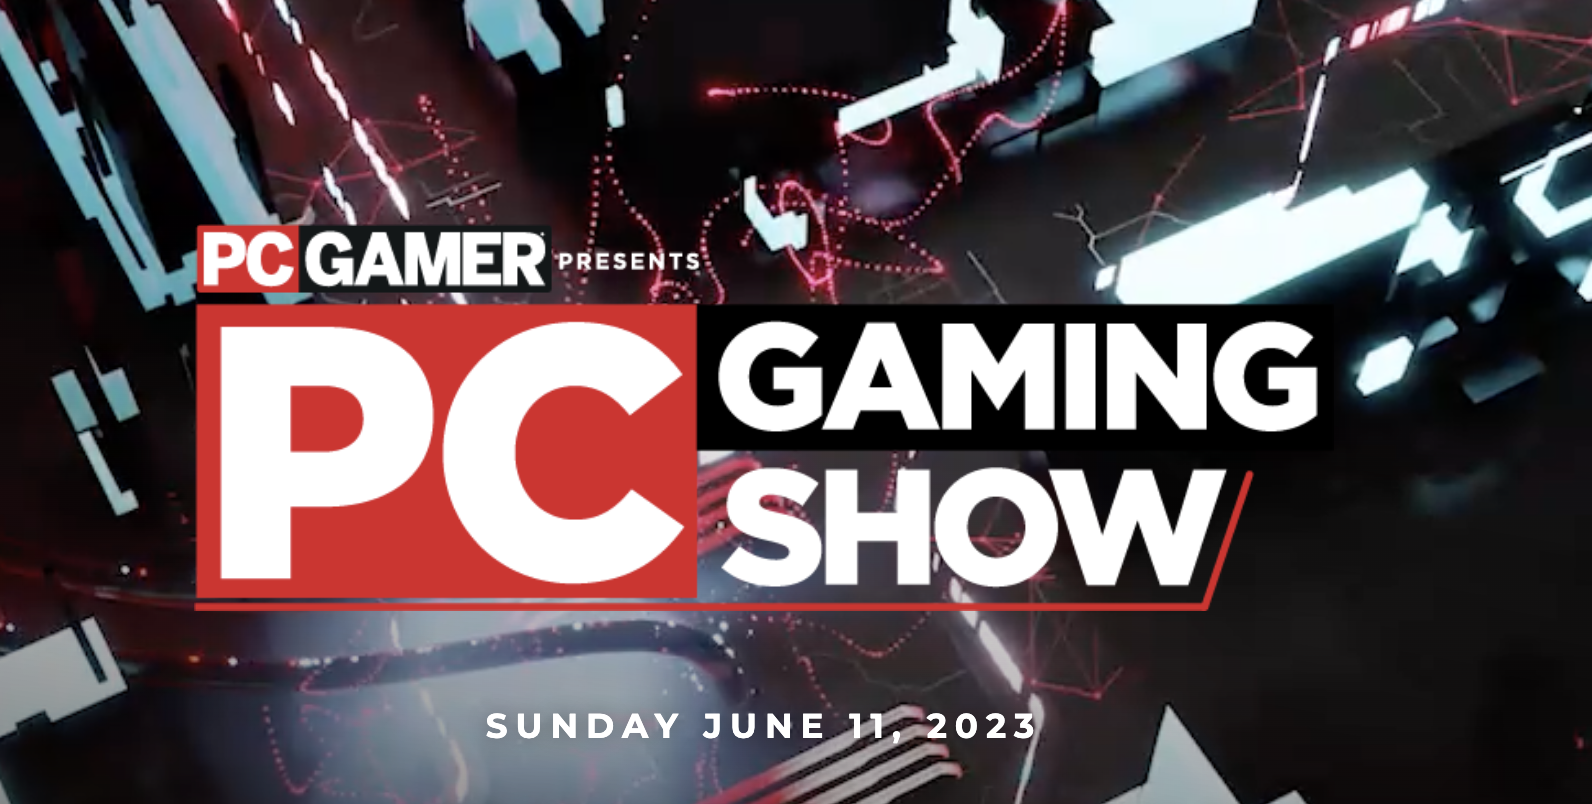 The PC Gaming Show 2023 promises some big exclusives